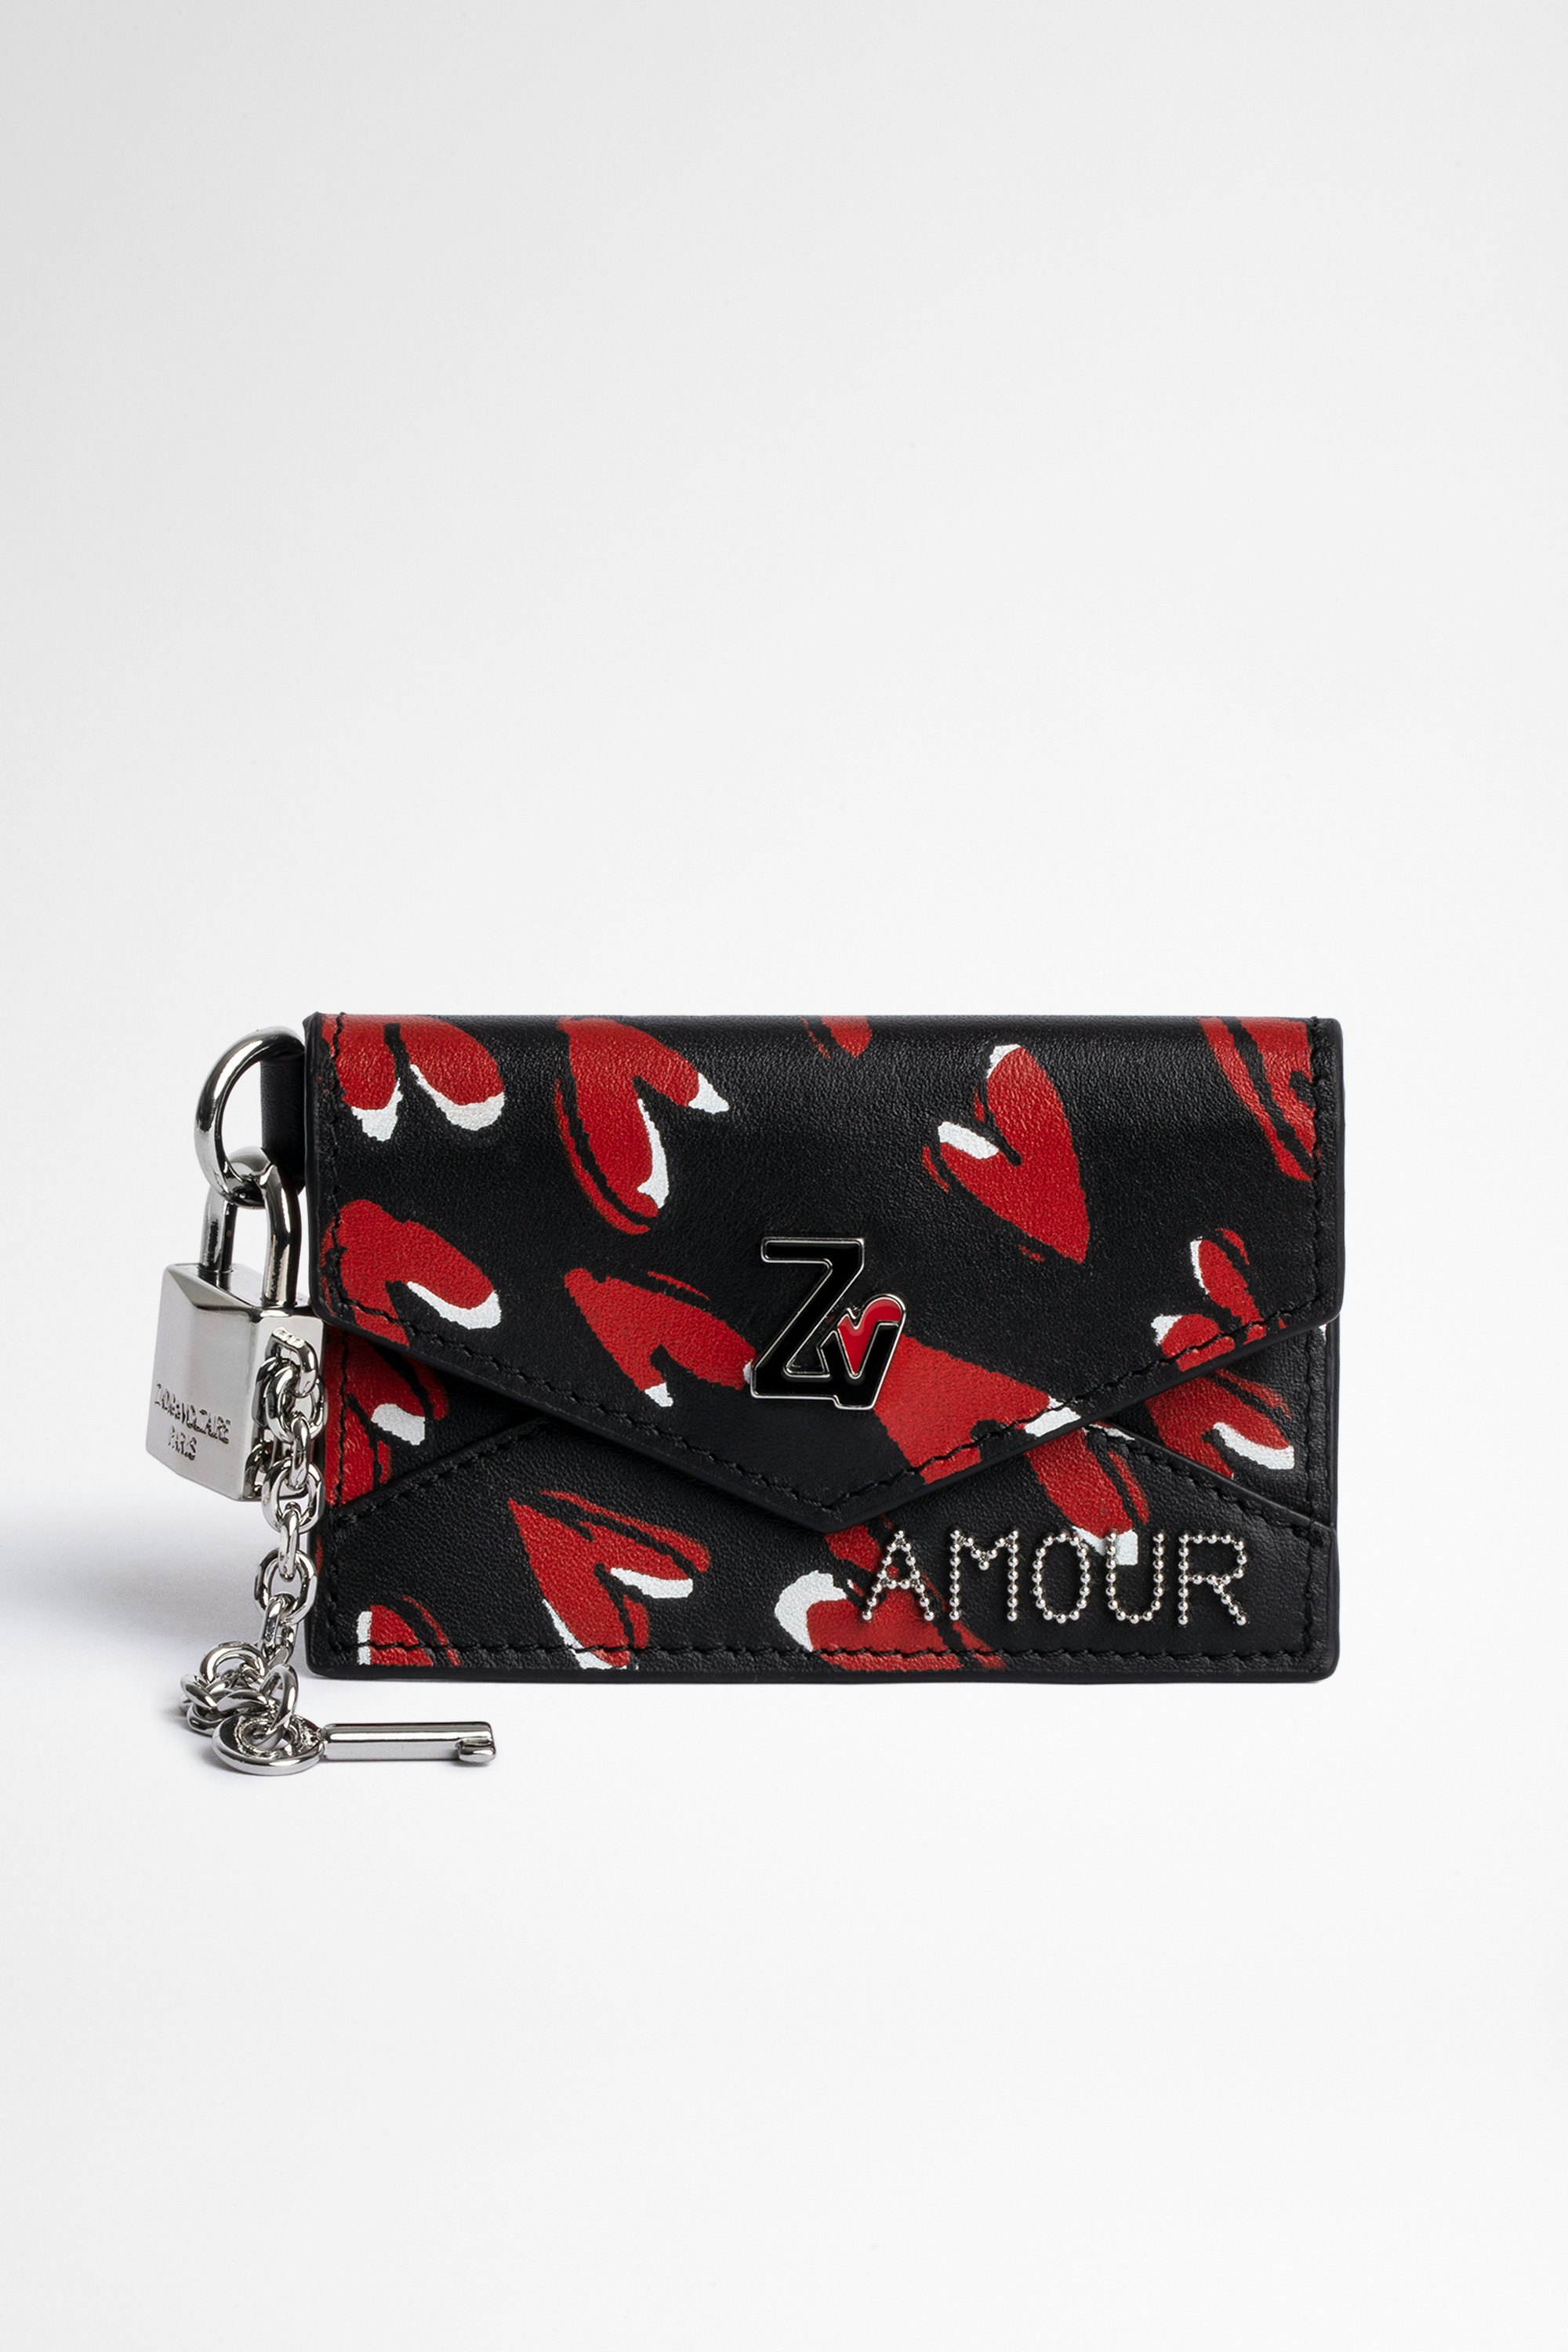 ZV Crush Pass Card Holder Leather Small women's card holder in black grained leather with all-over heart print